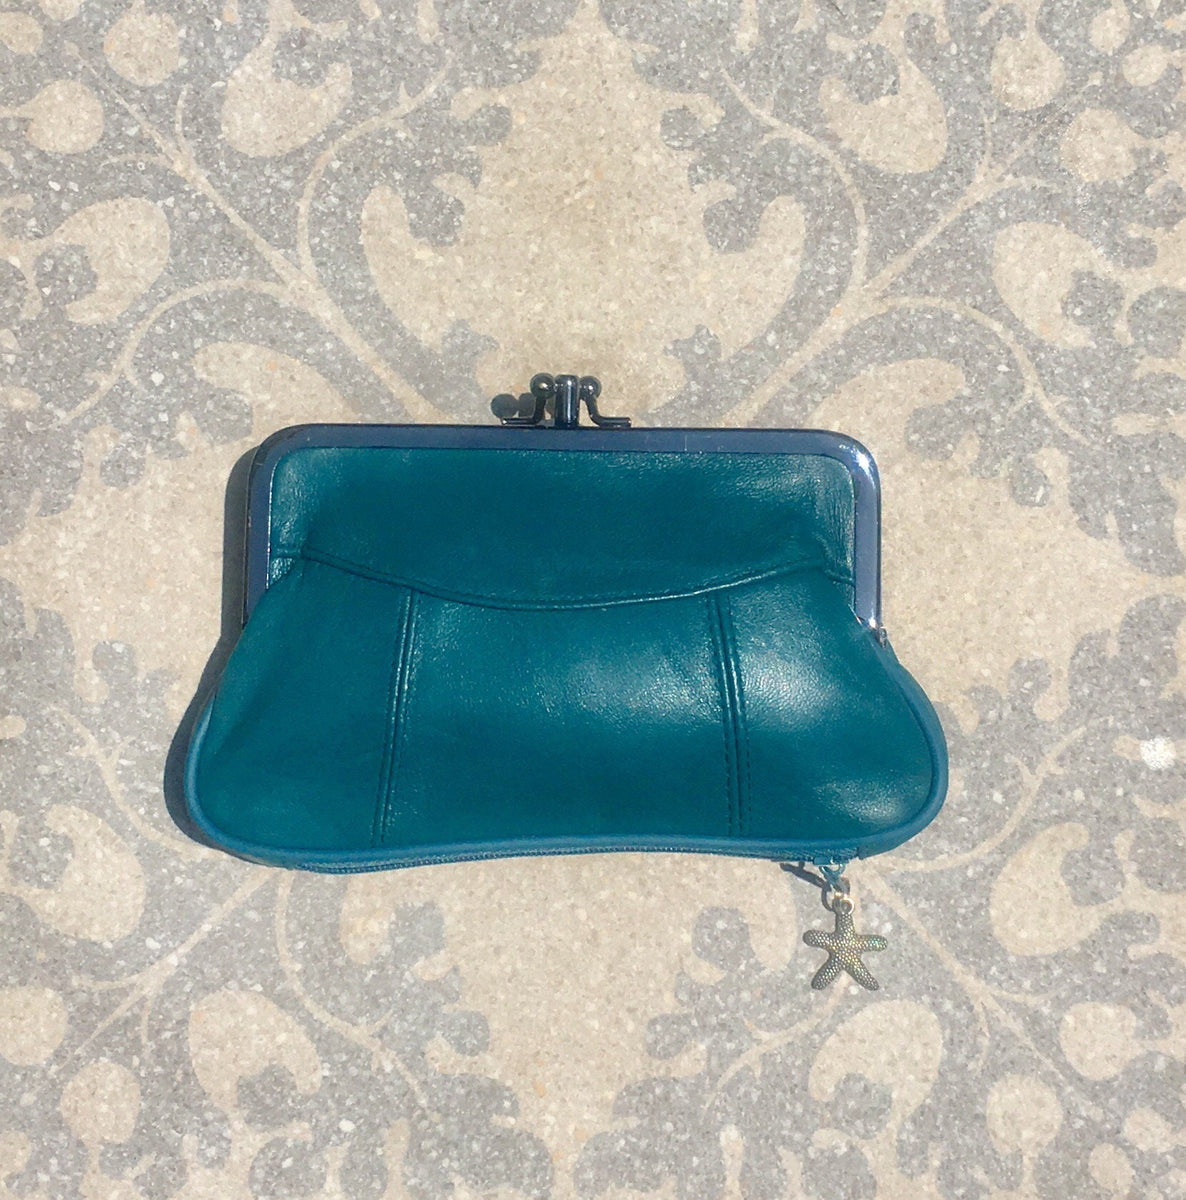 Genuine leather clip purse in TEAL BLUE. Retro leather purse, clip pur –  Handmade suede bags by Good Times Barcelona